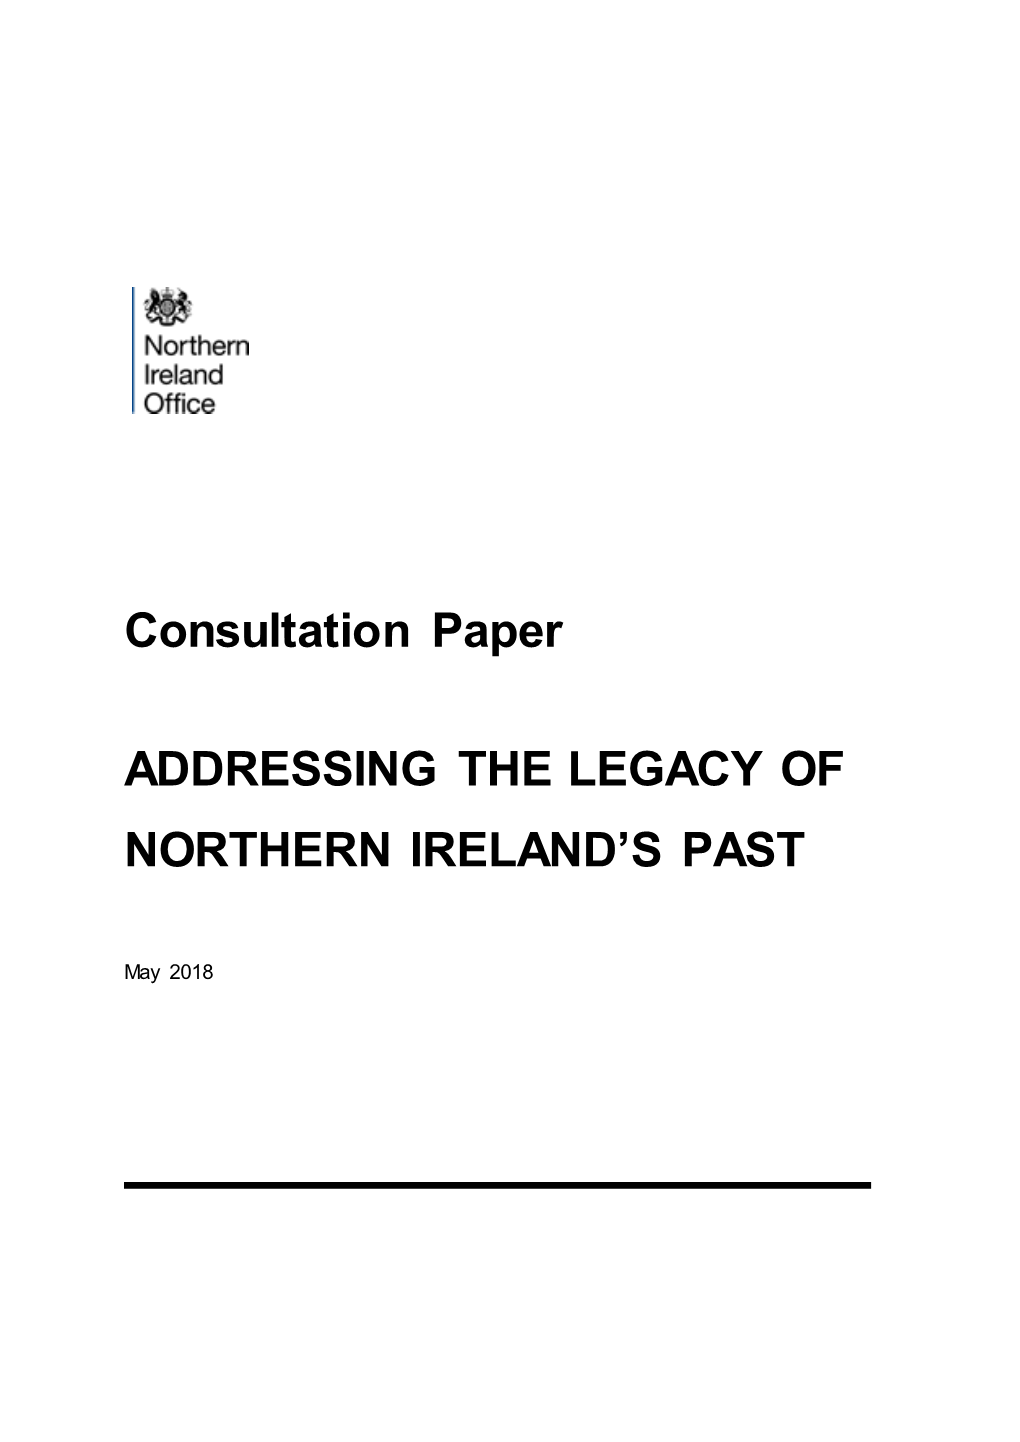 Consultation Paper: Addressing the Legacy of Northern Ireland's Past